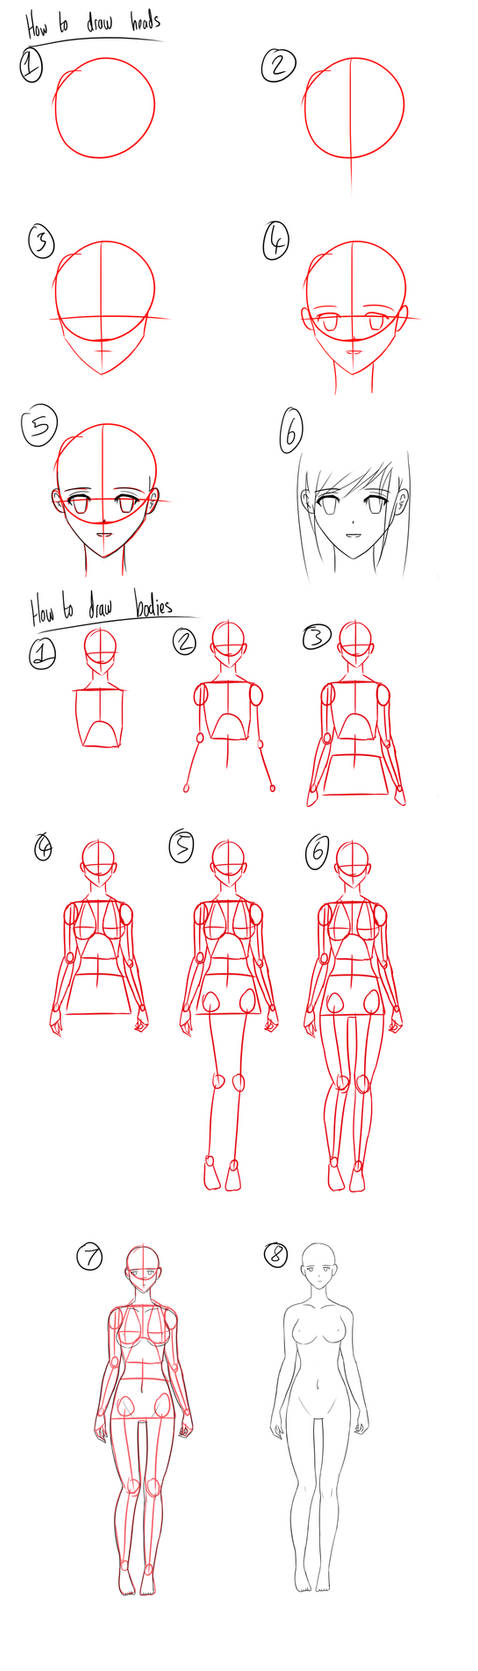 Tutorial - How to Draw Anime Heads/Female Bodies by Micky-K on DeviantArt